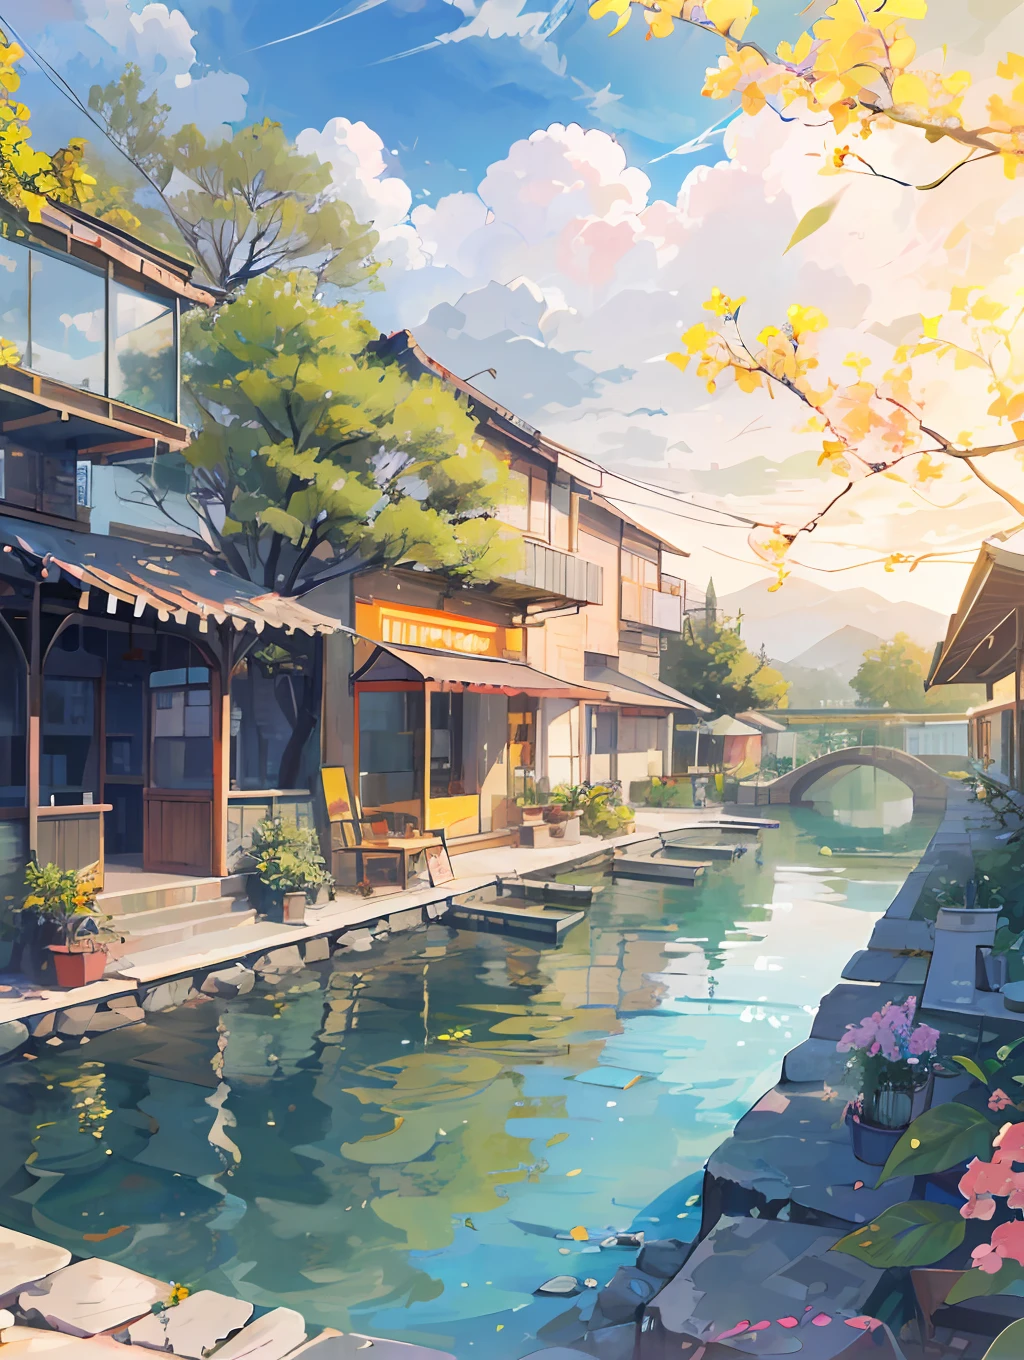 The healing cute style of natural scenery, river side, Bougainville, plants,((tileset)),the cozy image with the warm and bright sunny atmosphere in the background, and the beautiful scene of leisure.